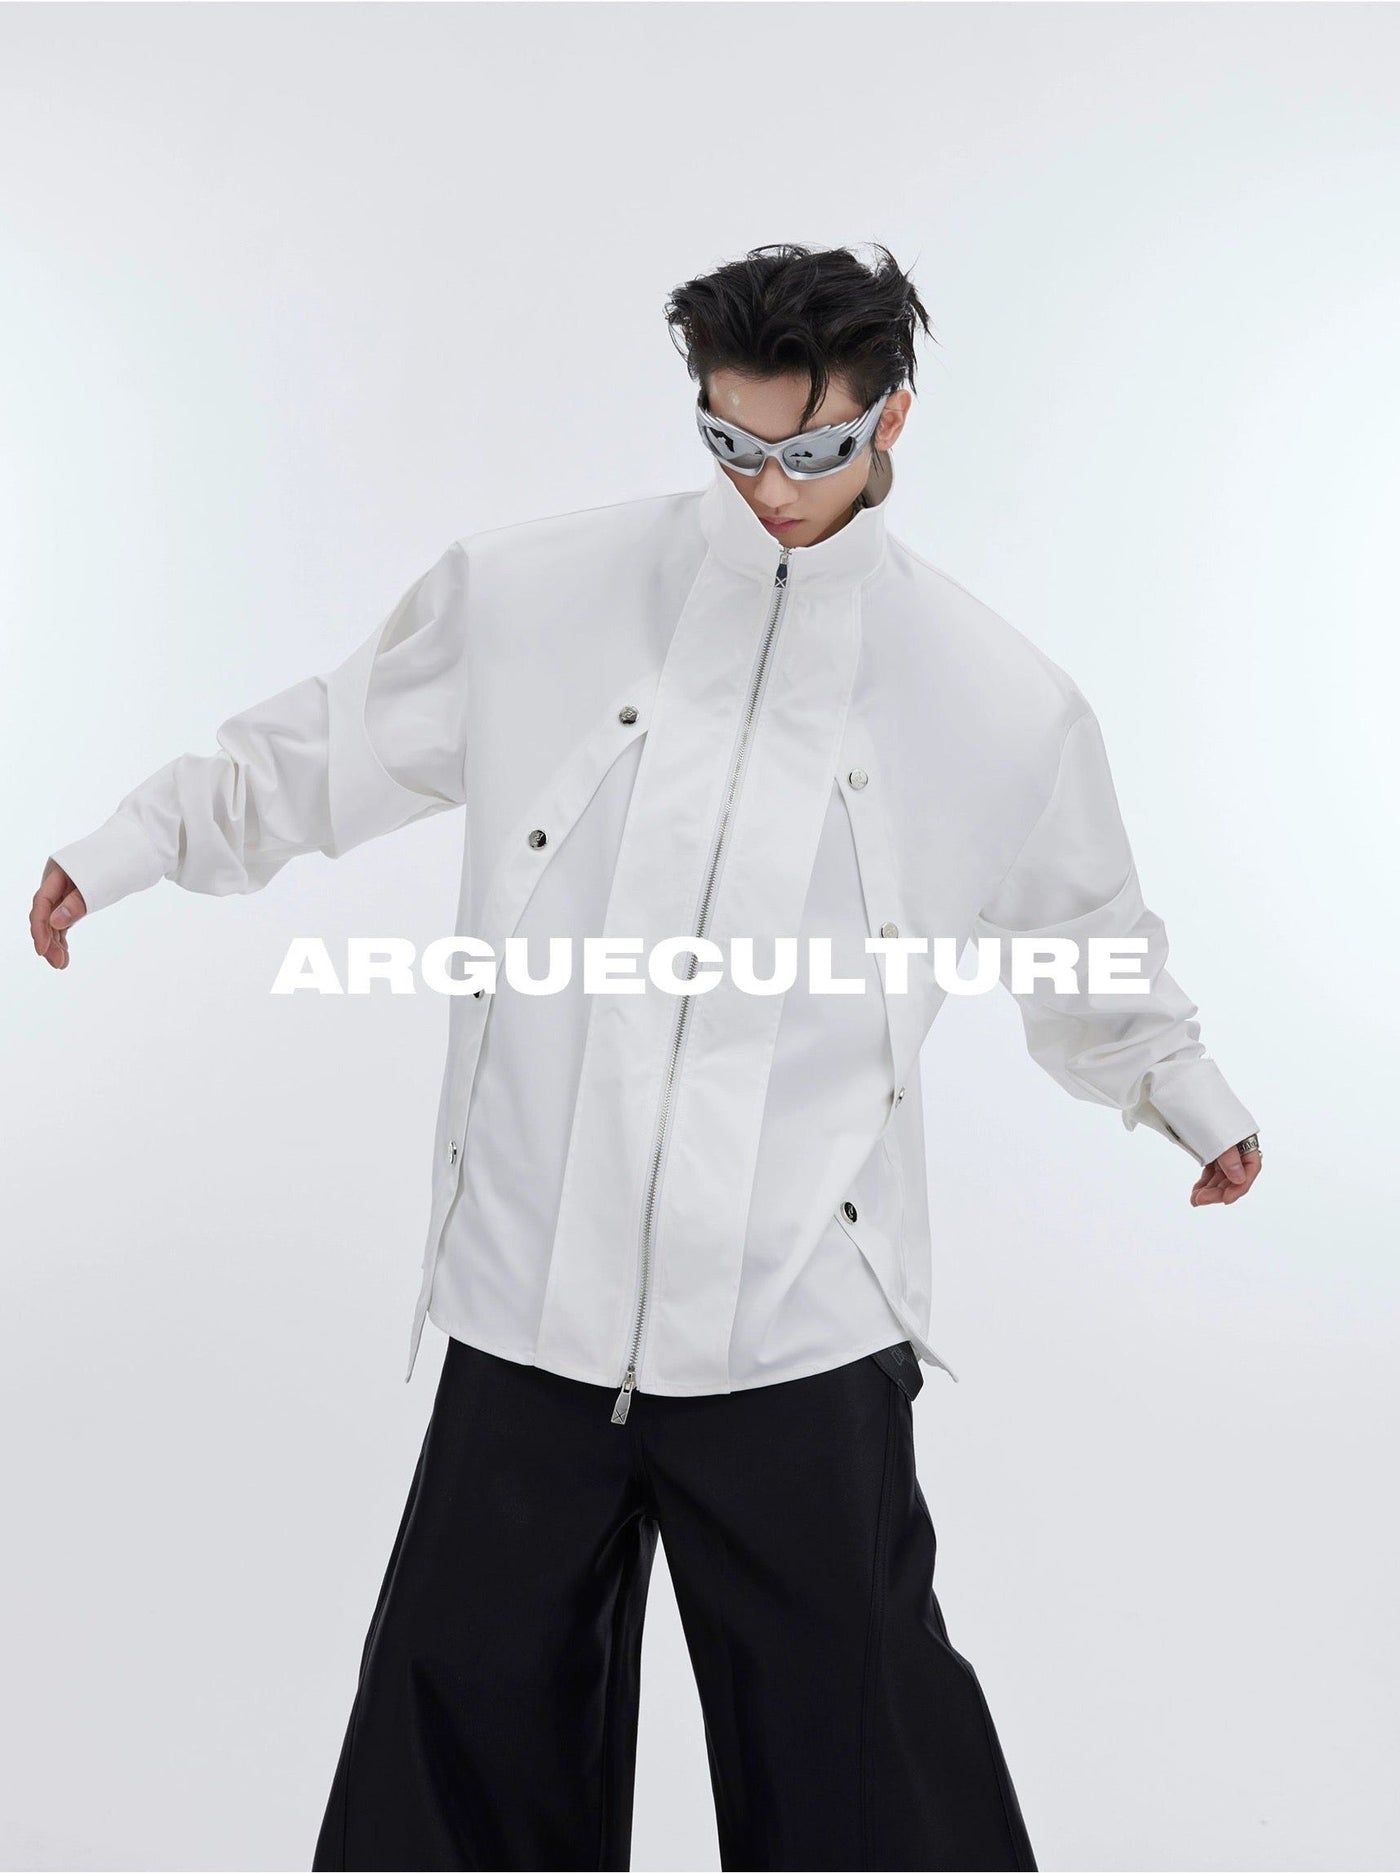 Structured Button and Zipper Jacket Korean Street Fashion Jacket By Argue Culture Shop Online at OH Vault